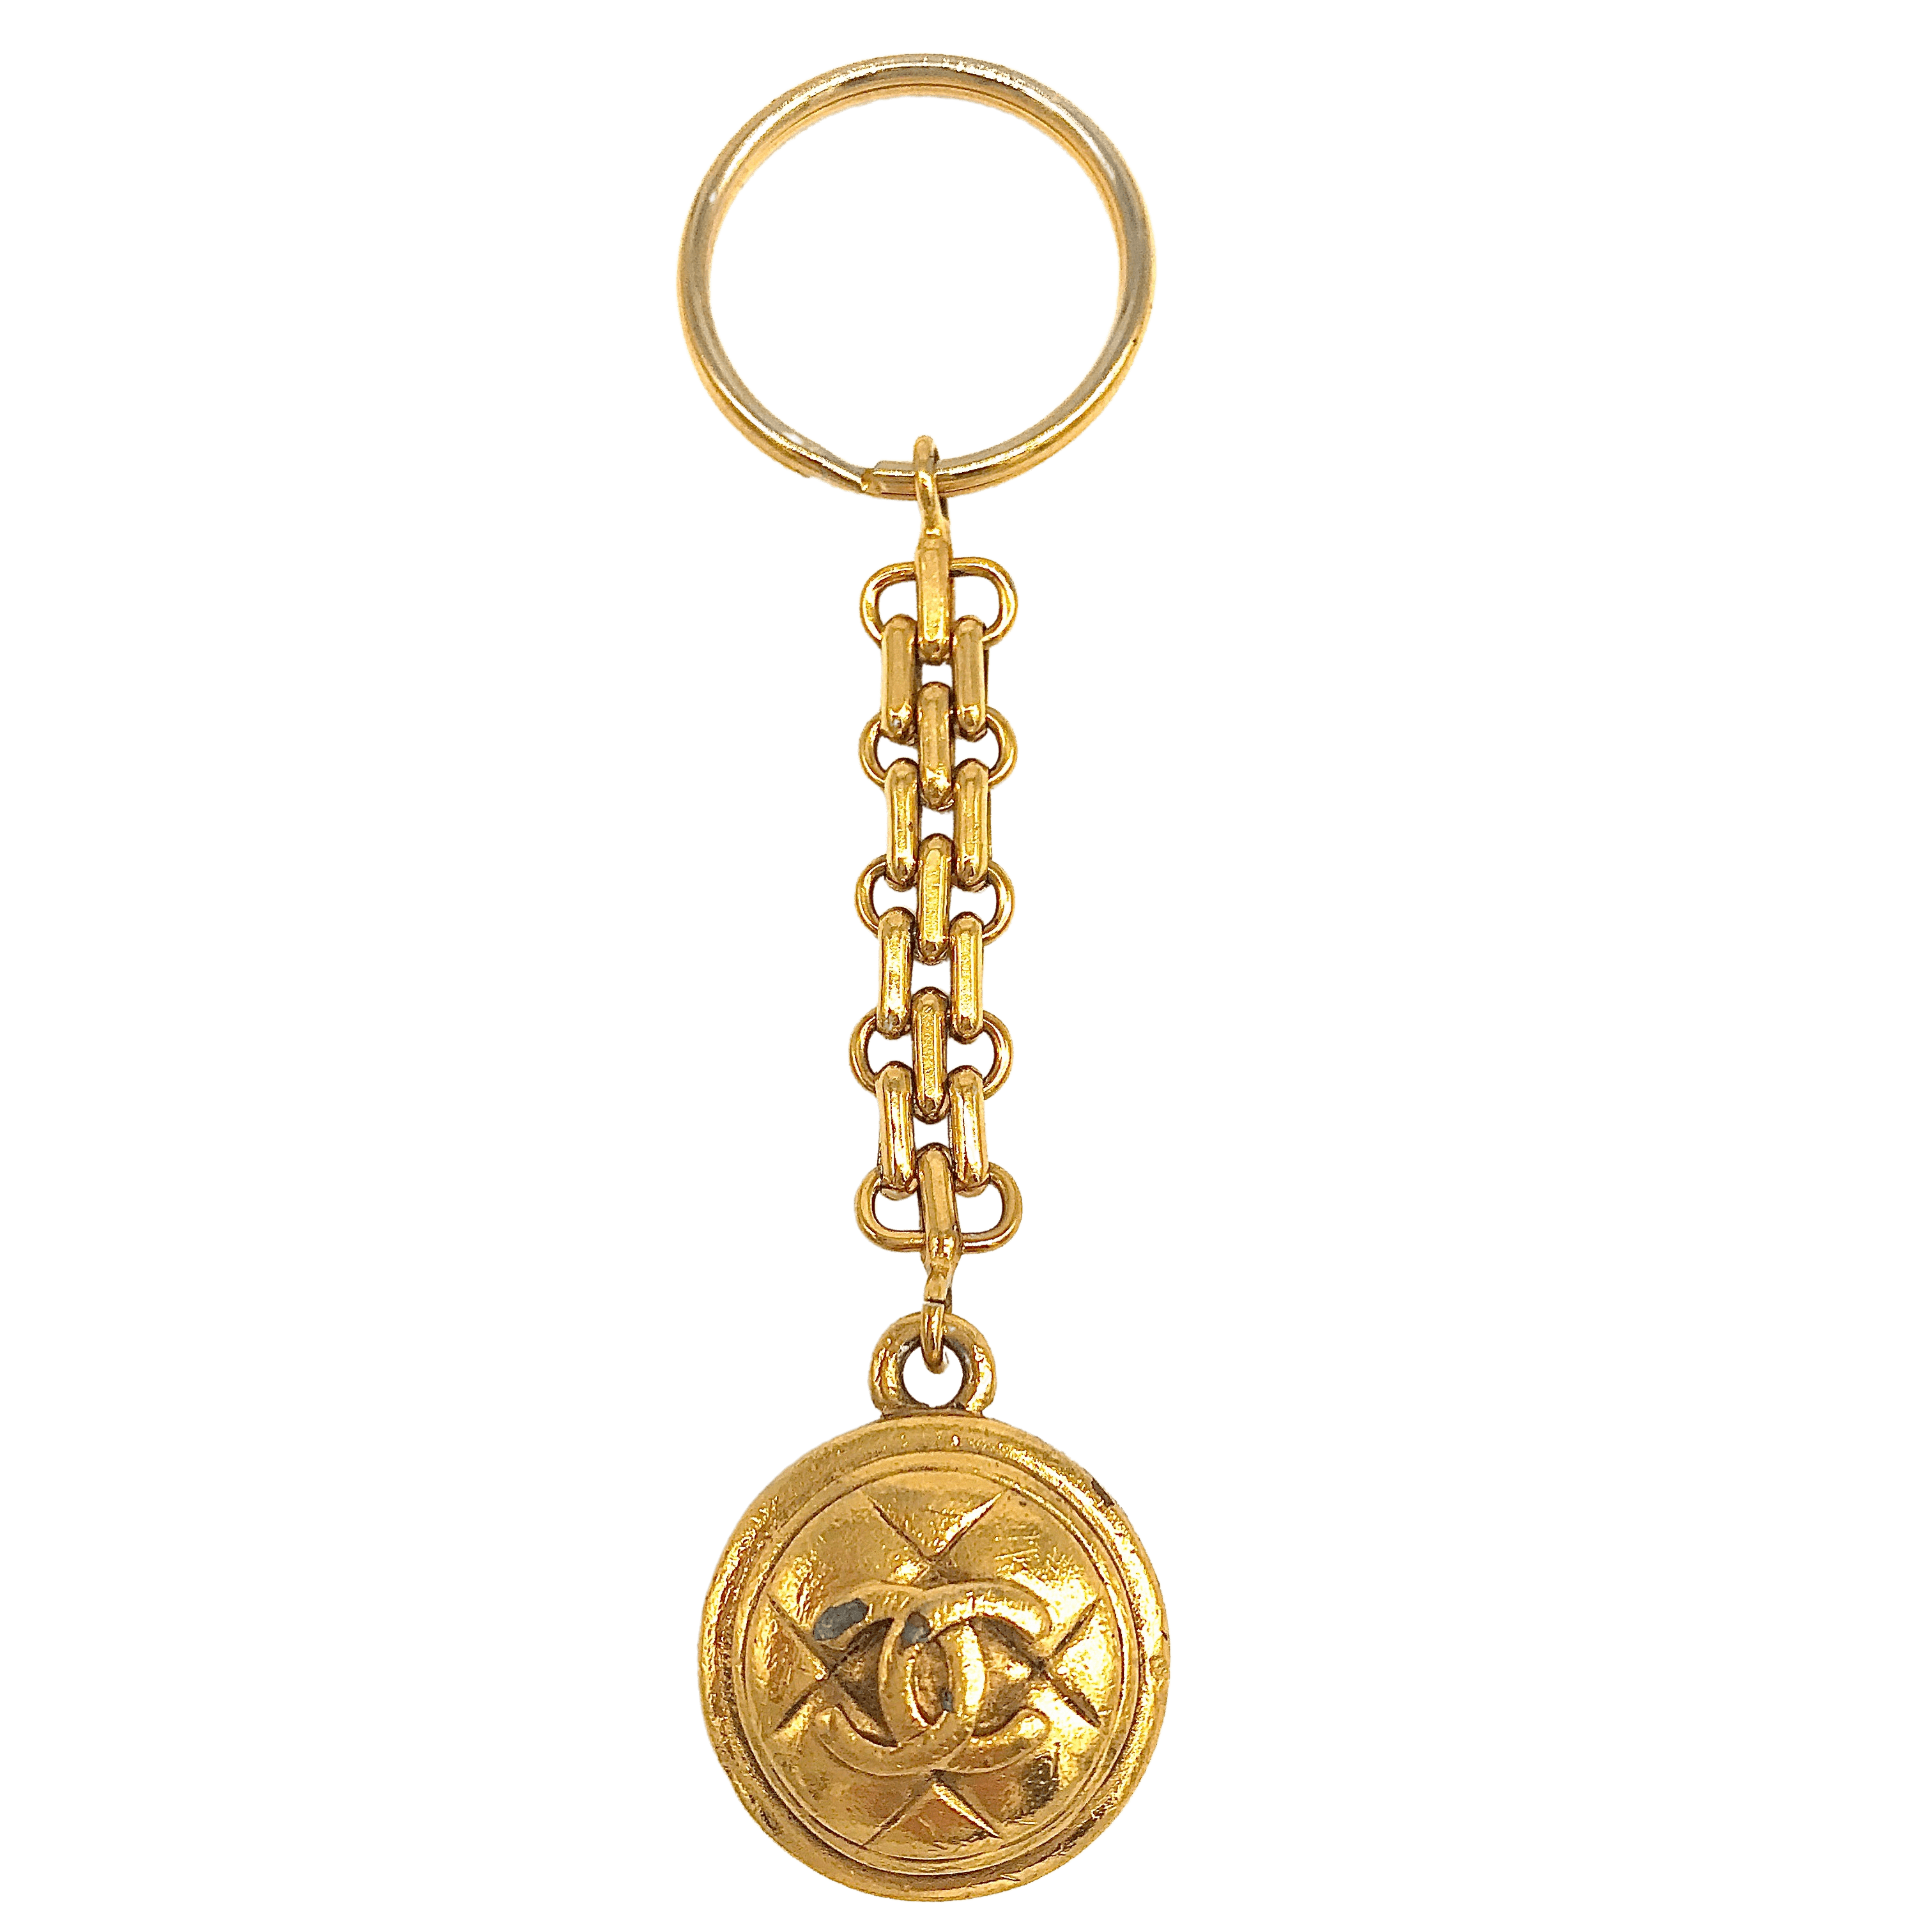 Sold at Auction: Chanel Costume Keychain